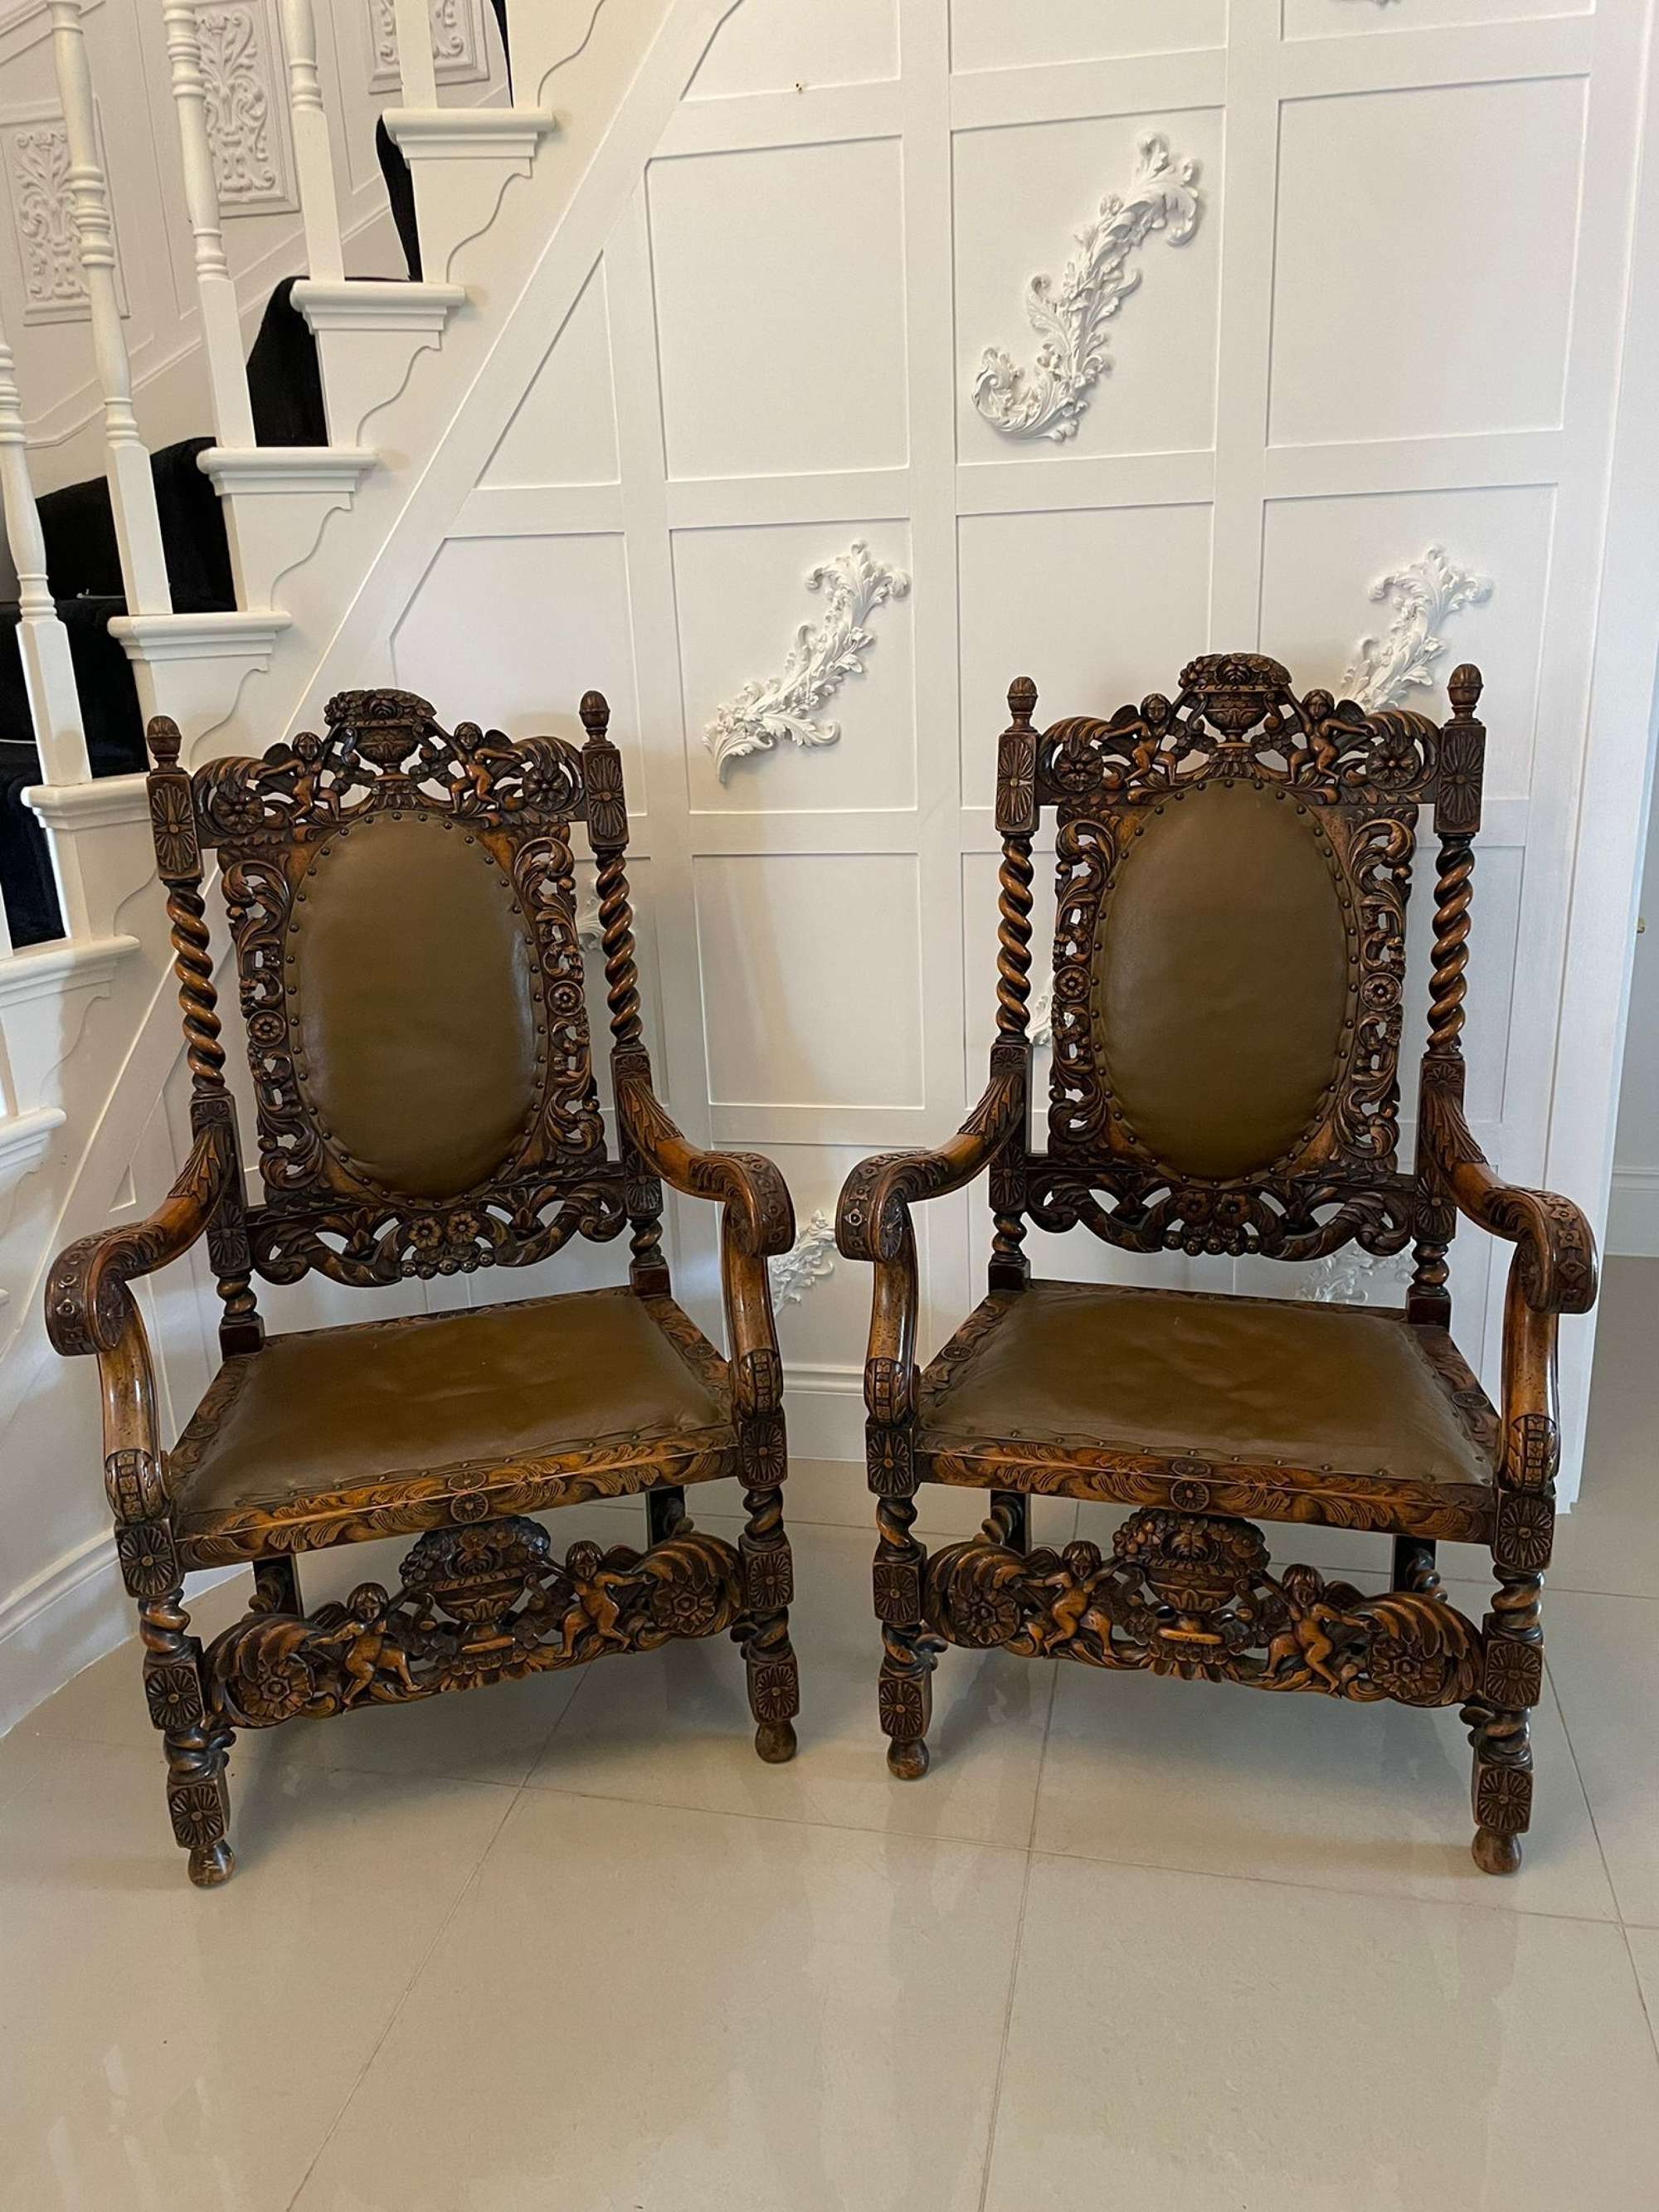 Outstanding Large Pair Of Antique Carved Walnut And Leather Armchairs